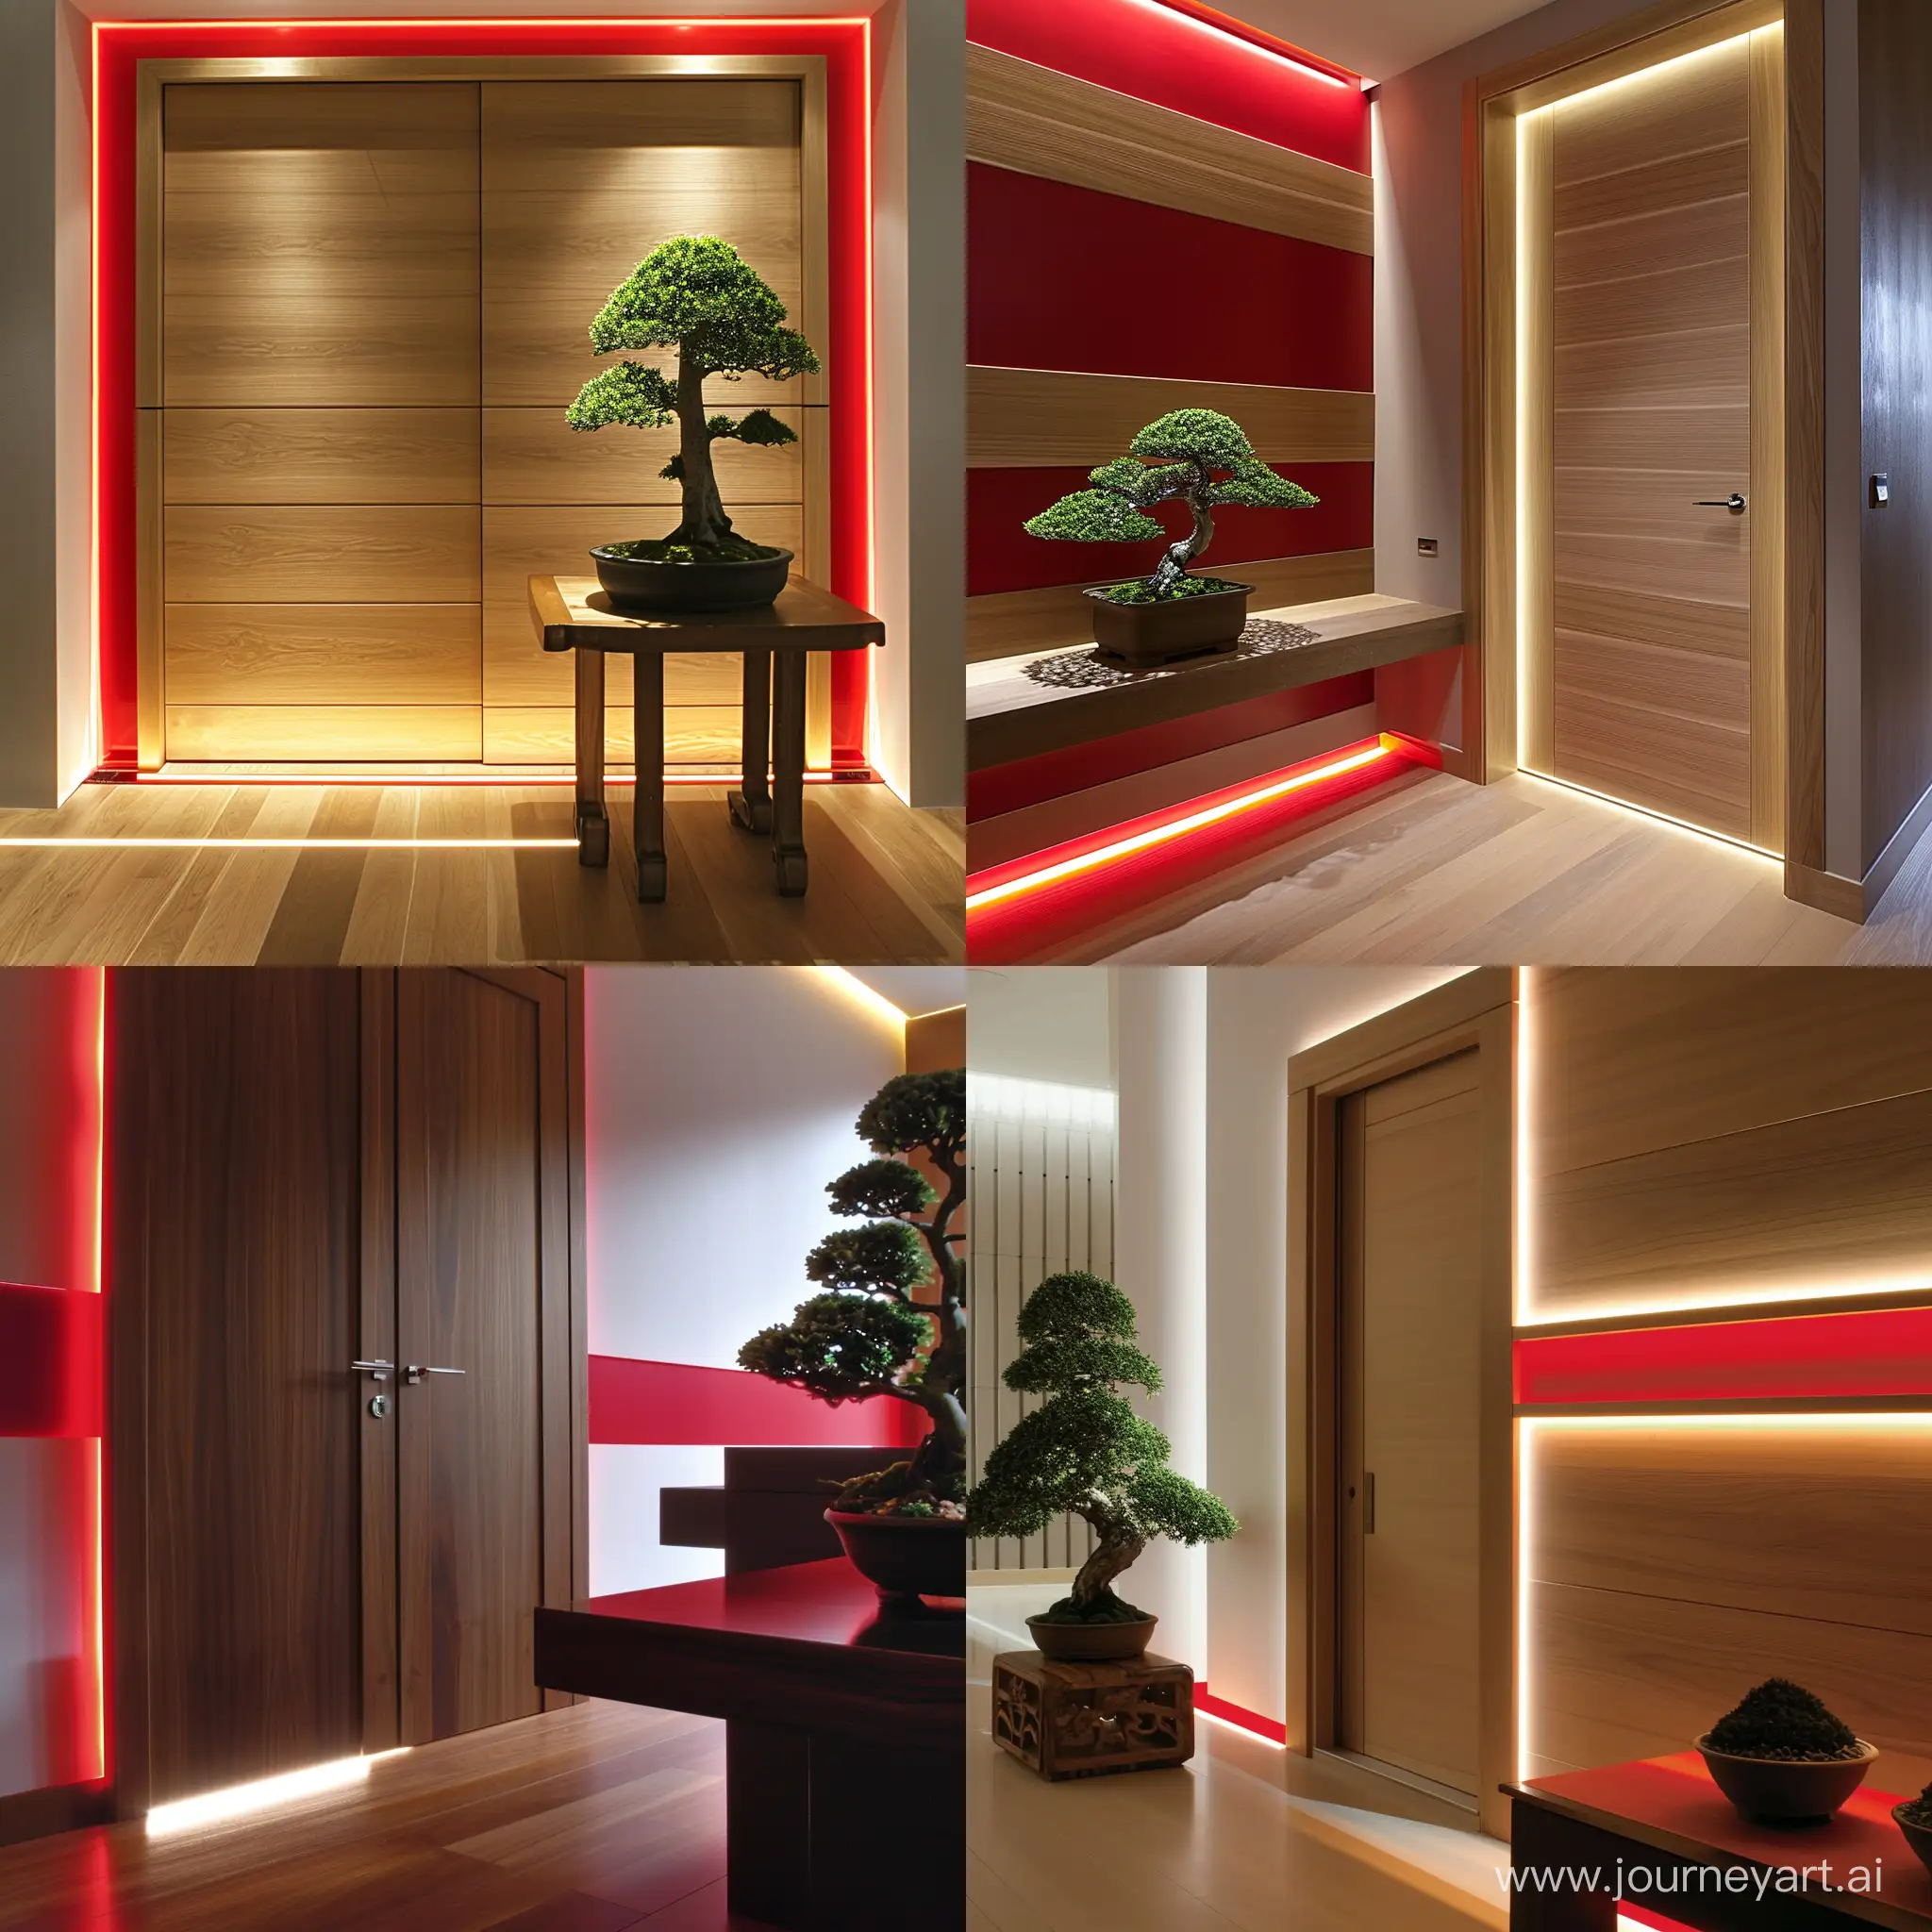 Contemporary-Custom-Cherry-Veneer-Doors-with-LED-Accent-Lighting-in-Stylish-AsianInspired-Room